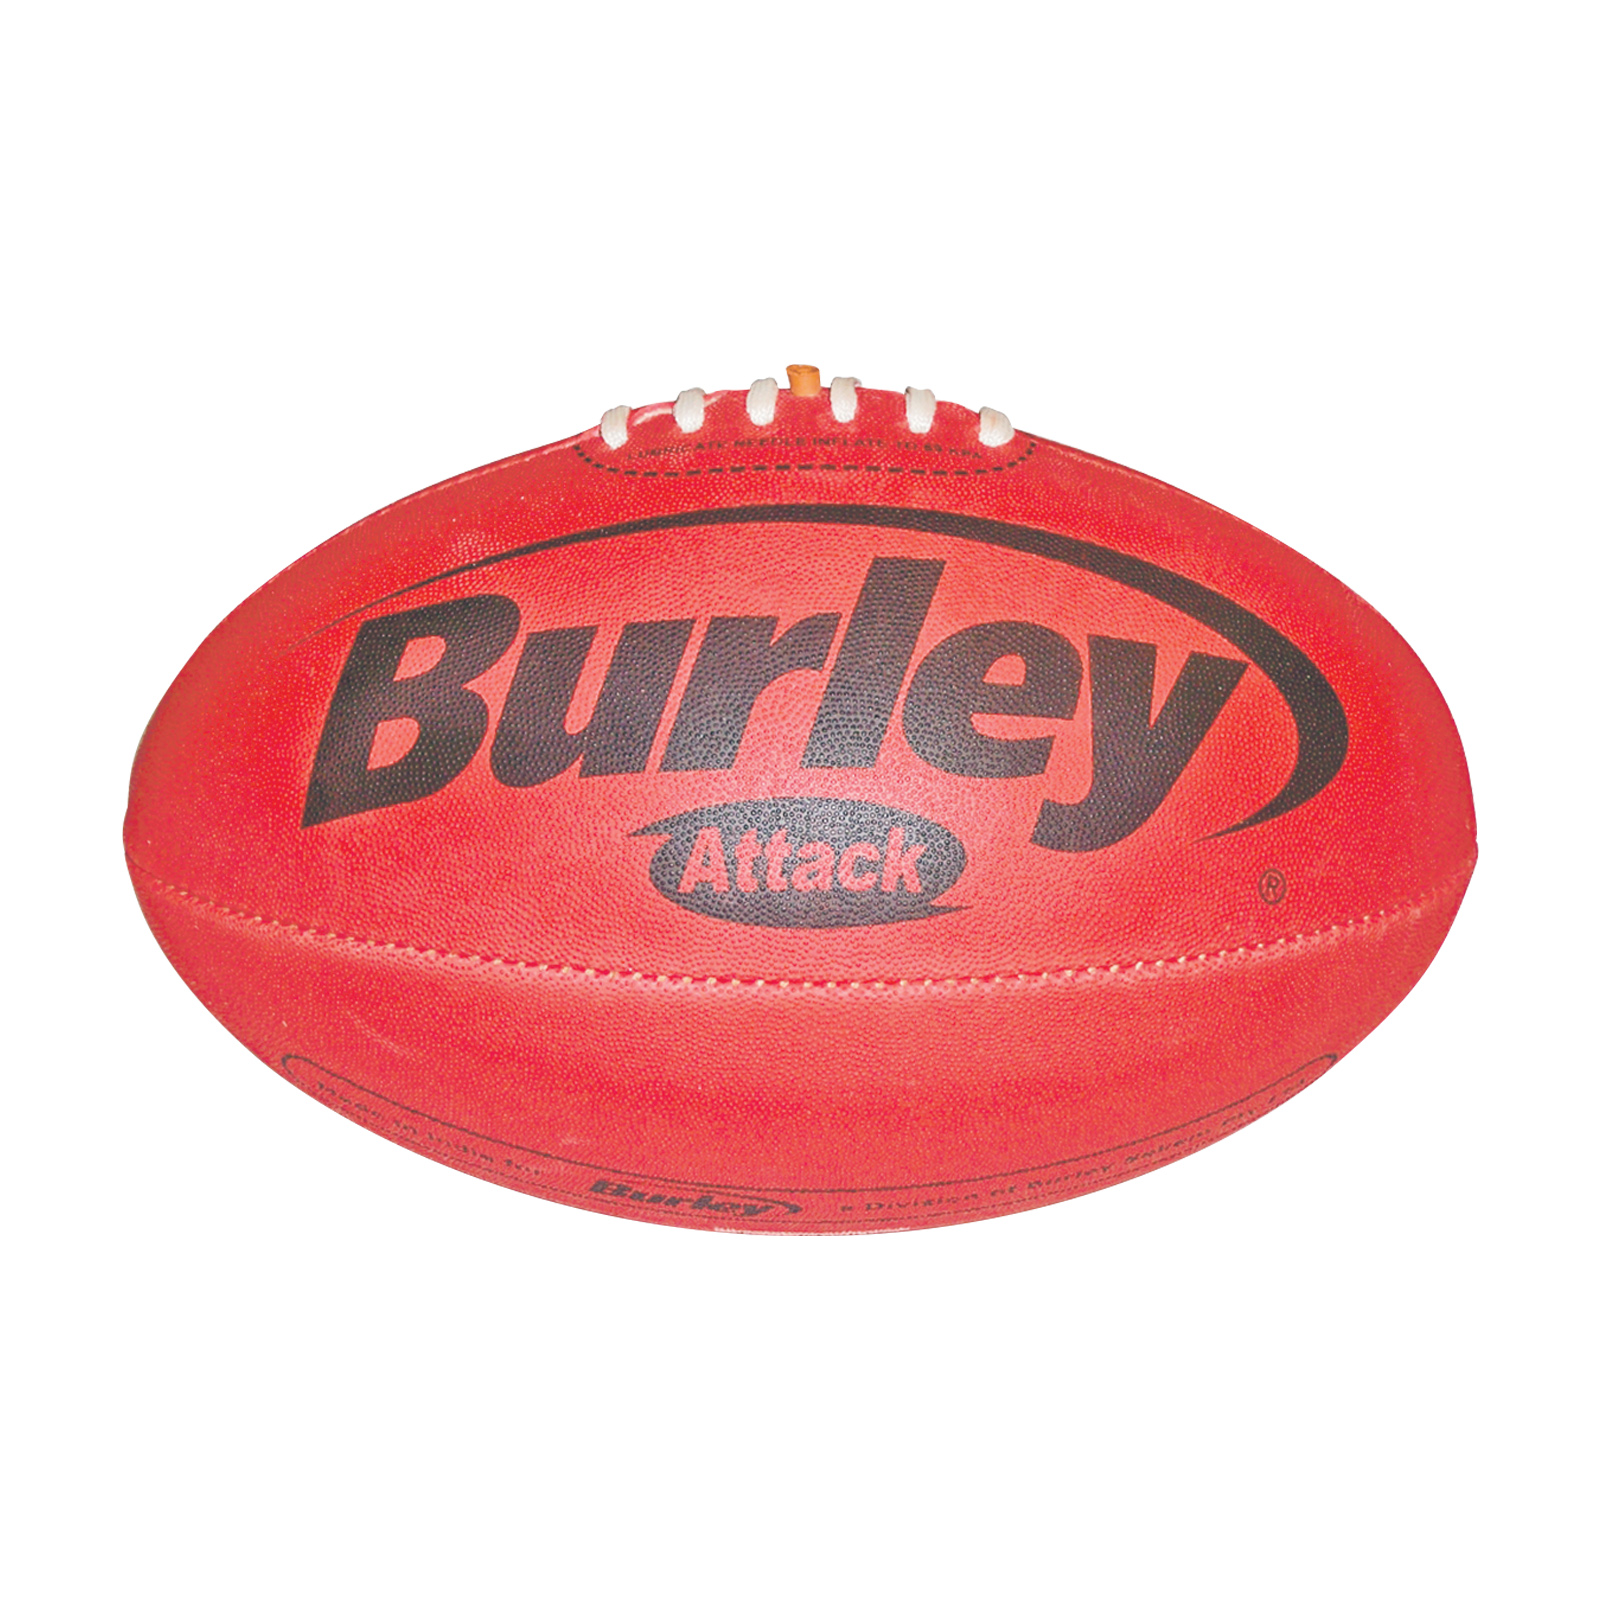 Burley Attack Football Size 2